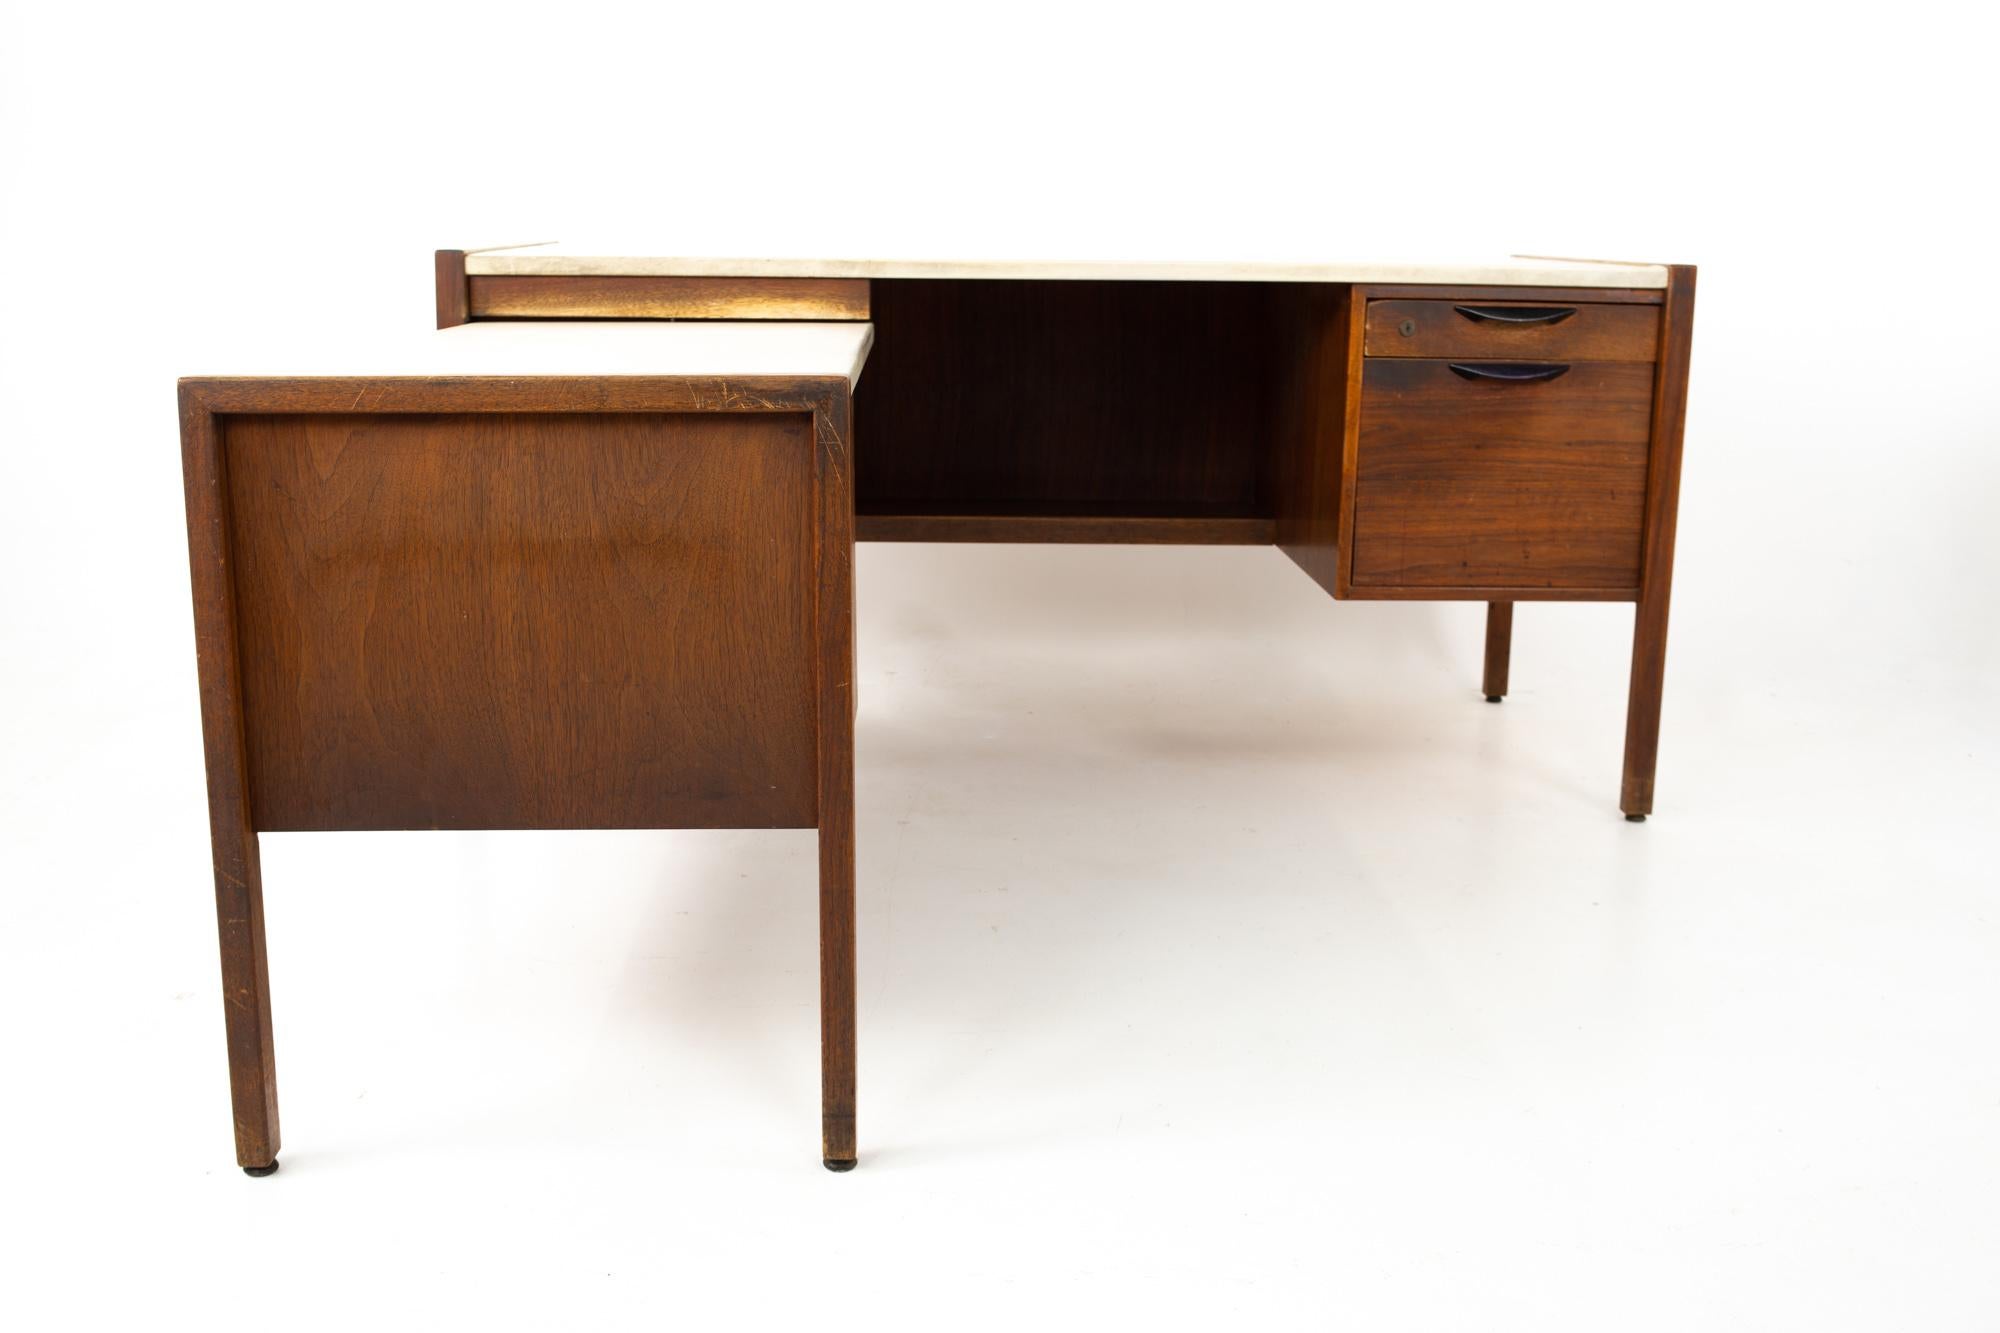 Jens Risom Mid Century walnut and white leather executive desk
Desk measures: 62 wide x 67.5 deep x 29 inches high 

All pieces of furniture can be had in what we call restored vintage condition. This means the piece is restored upon purchase so